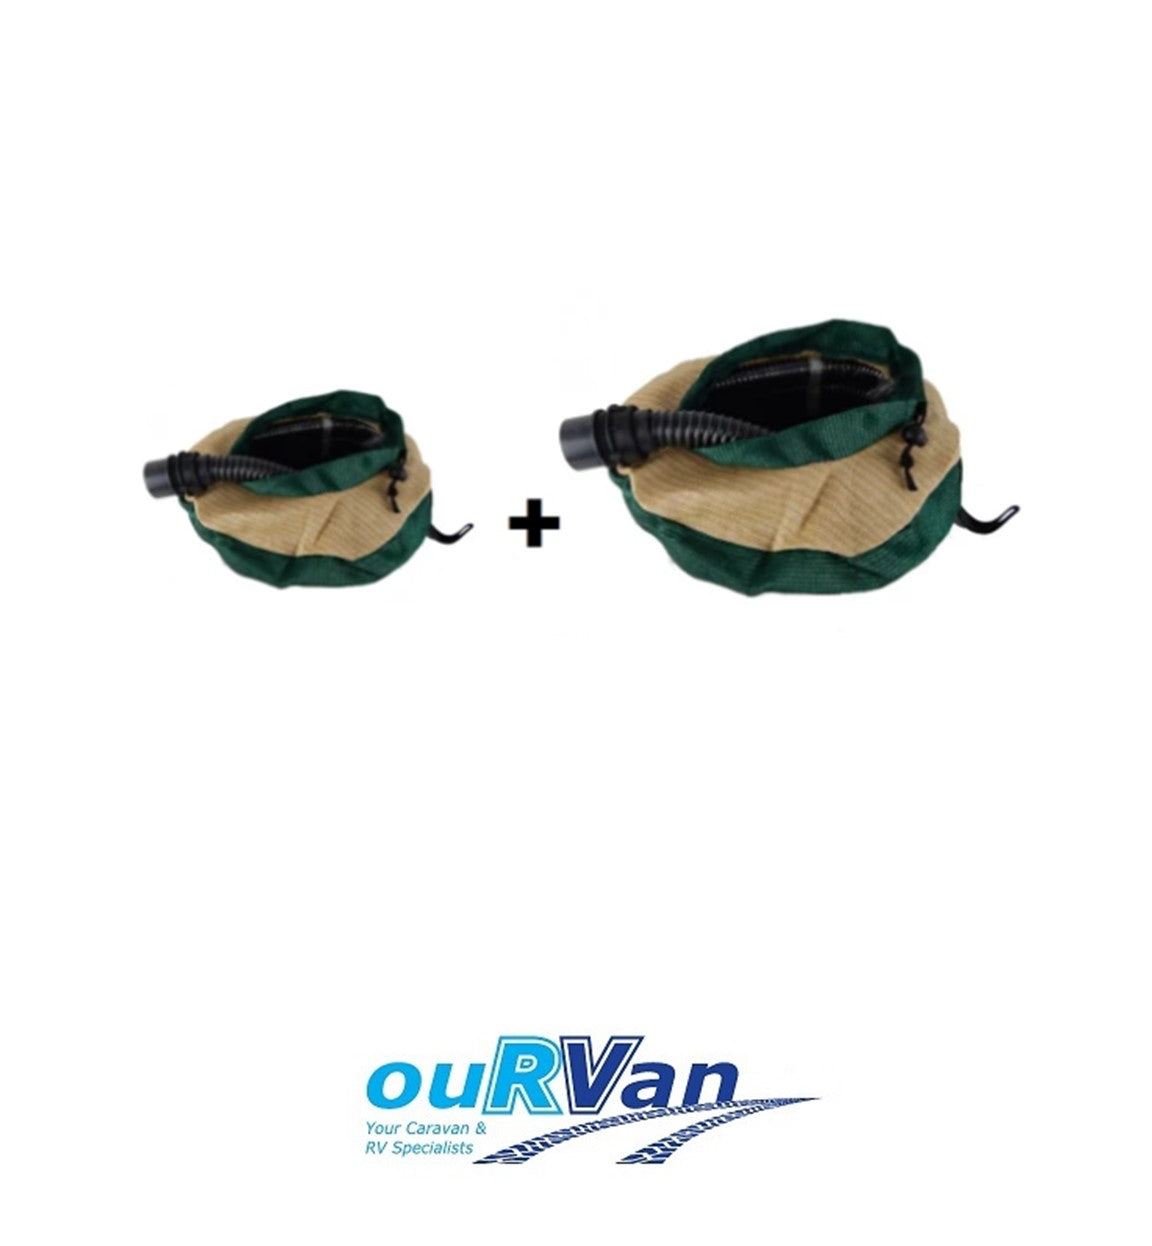 Hose Bag Twin Pack - 1 X Large Plus 1 X Small